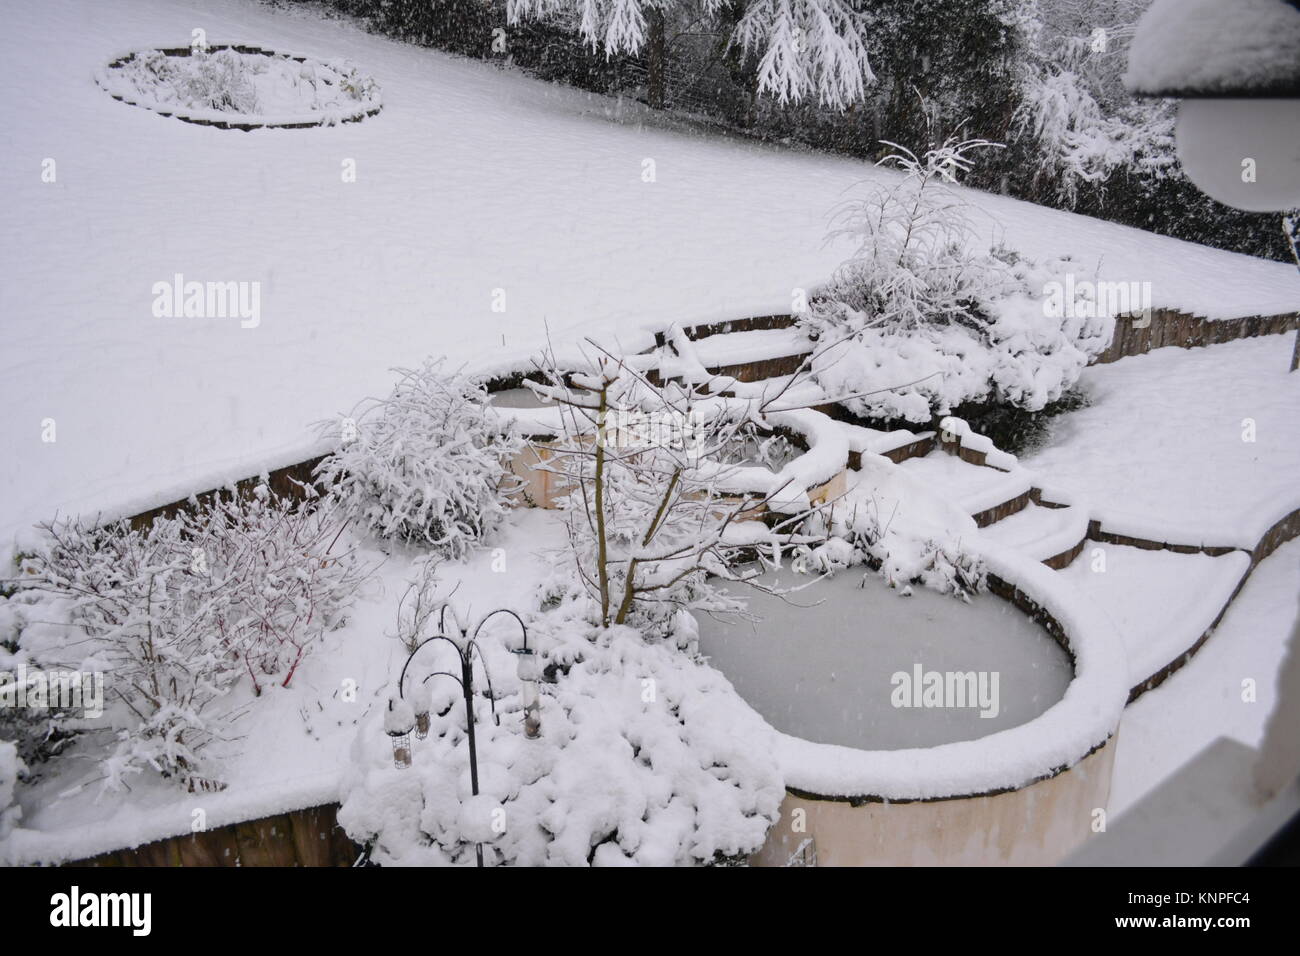 large circular ponds in snow and ice covered in garden after a heavy snow storm with small shrubs and bushes the doward south herefordshire england UK Stock Photo